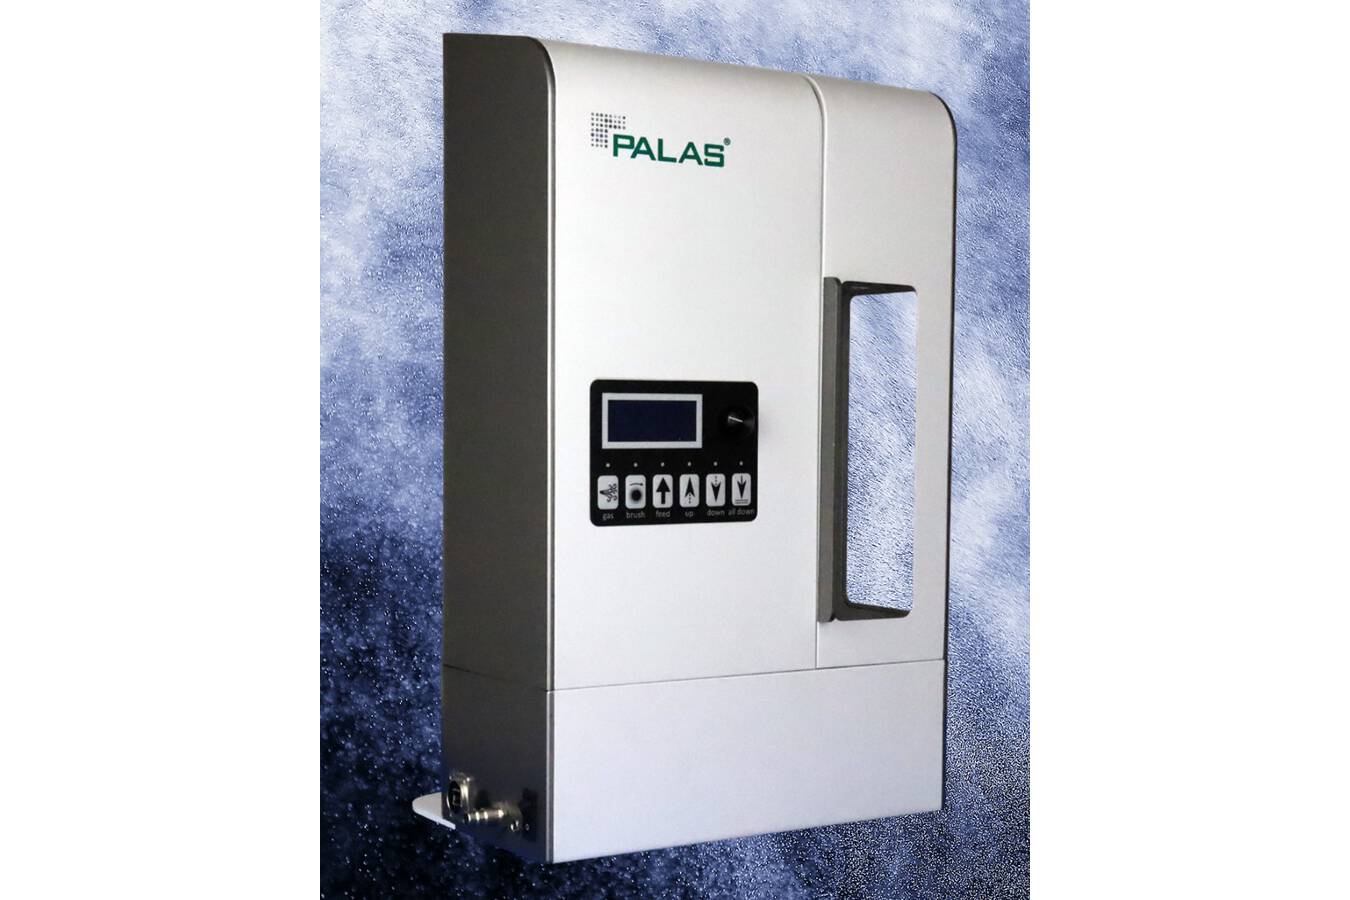 The New Aerosol Generators by Palas Fast. Simple. Reproducible. The RBG System. With integrated pump or pressure-proof - The new aerosol generators from Palas GmbH meet all requirements